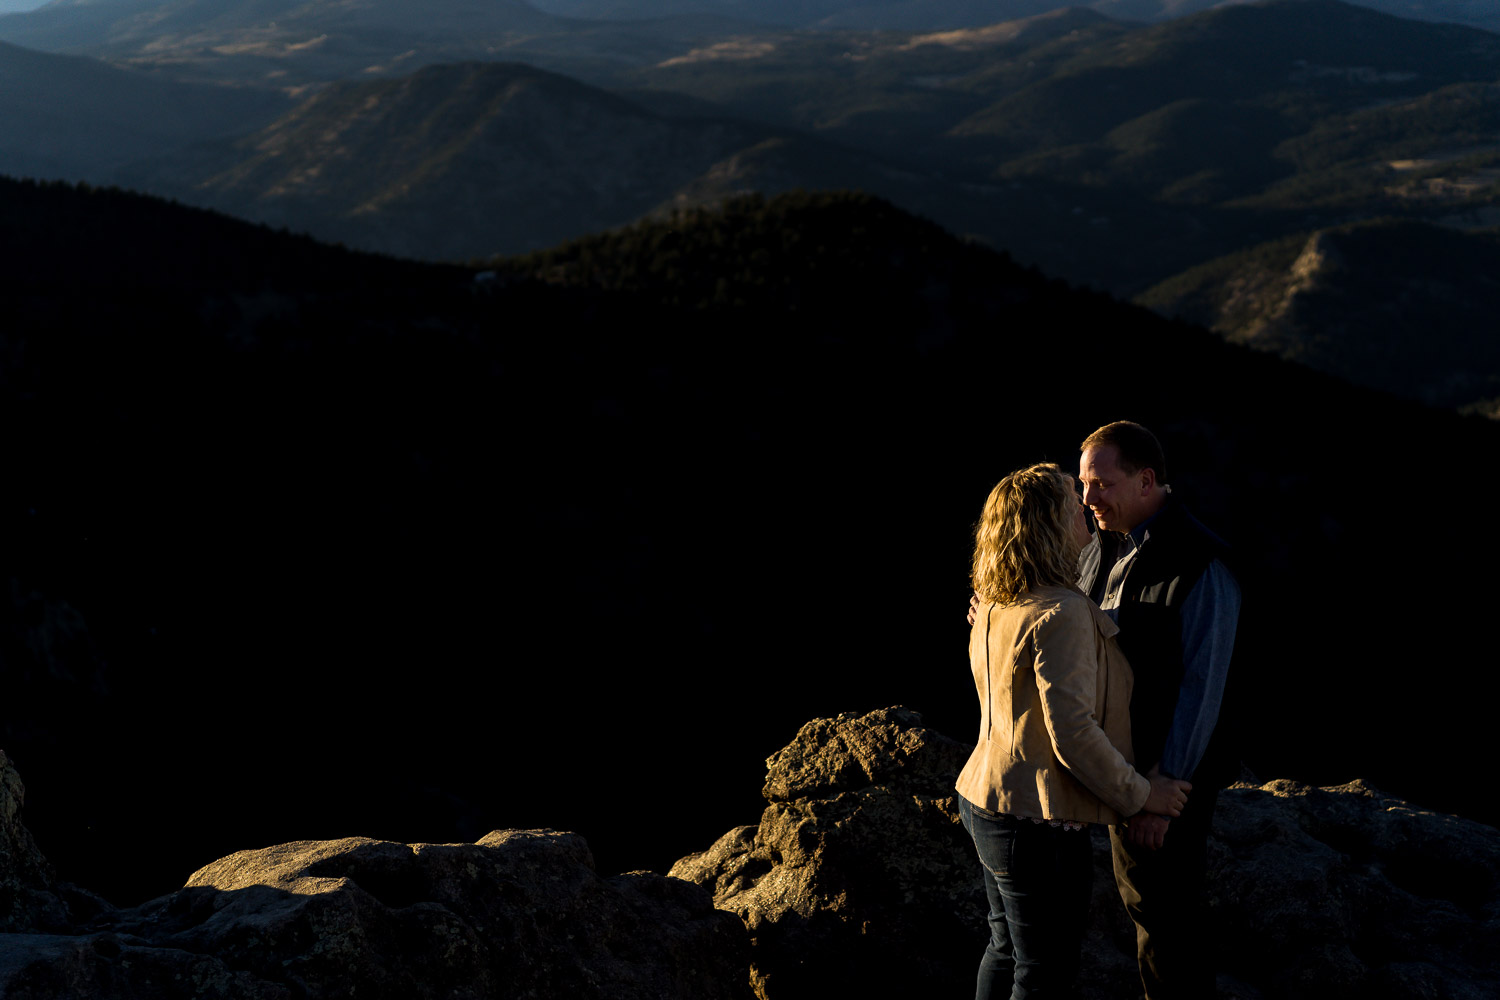 Boulder Engagement shoot with Mountain views